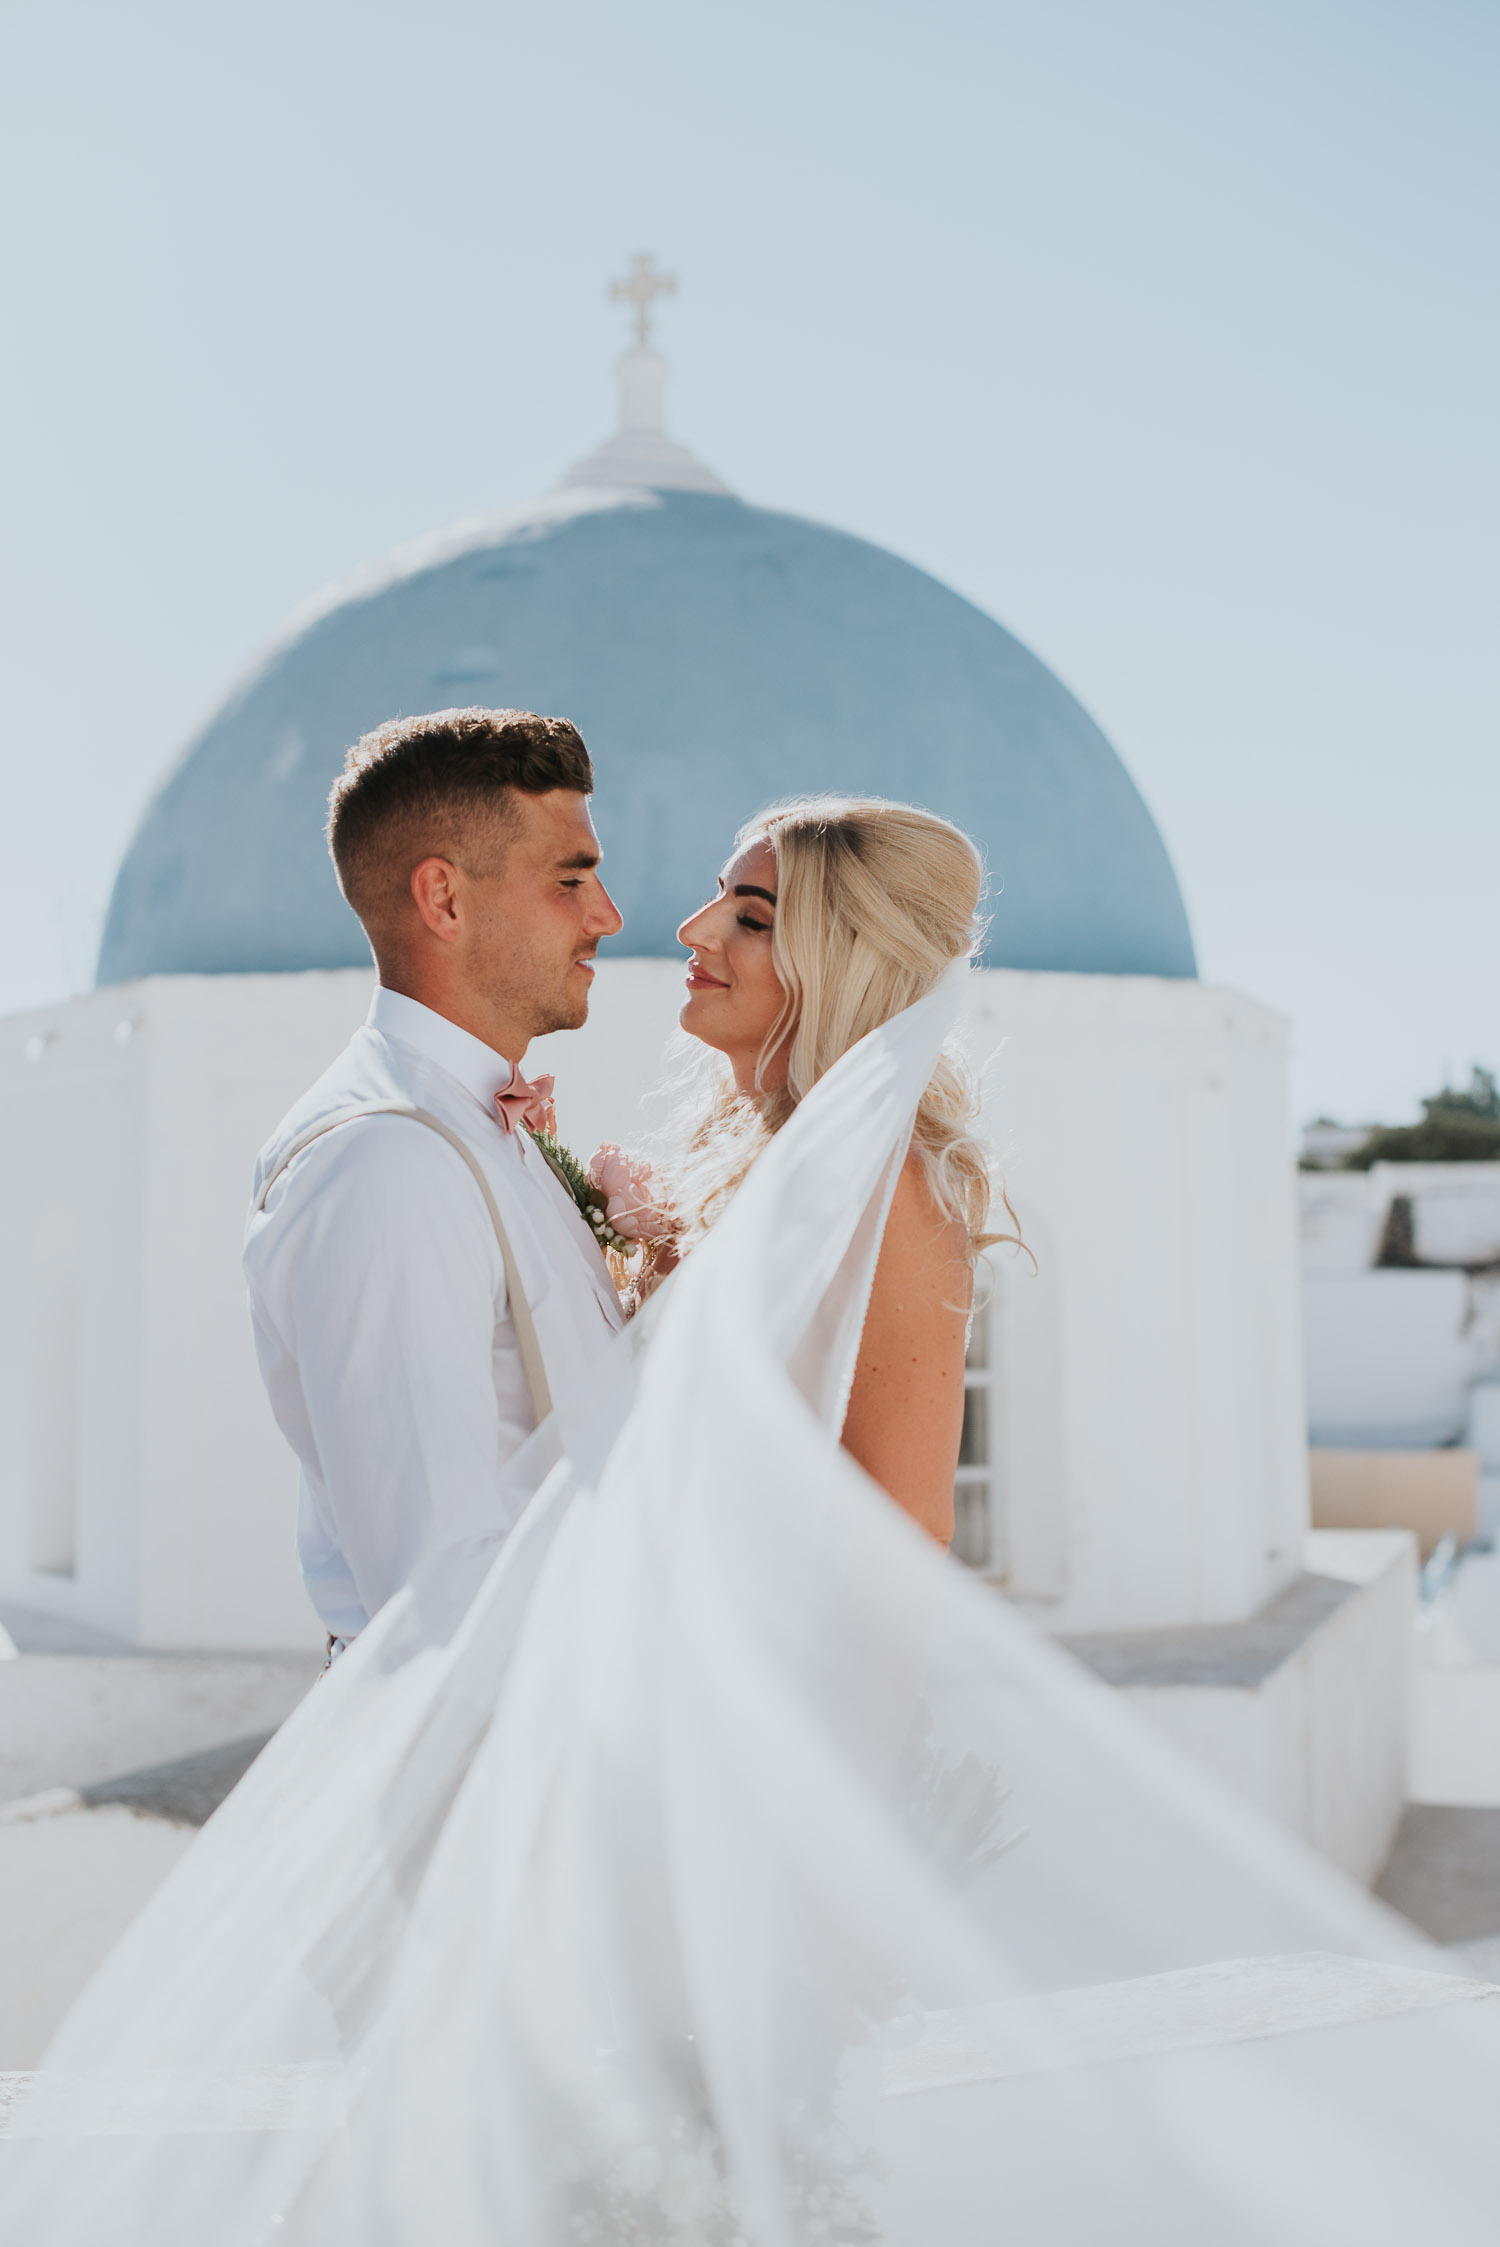 Wedding photographer Santorini: close up of bride and groom looking at each other with the blue dome behind and the veil engulfing them by Ben and Vesna.